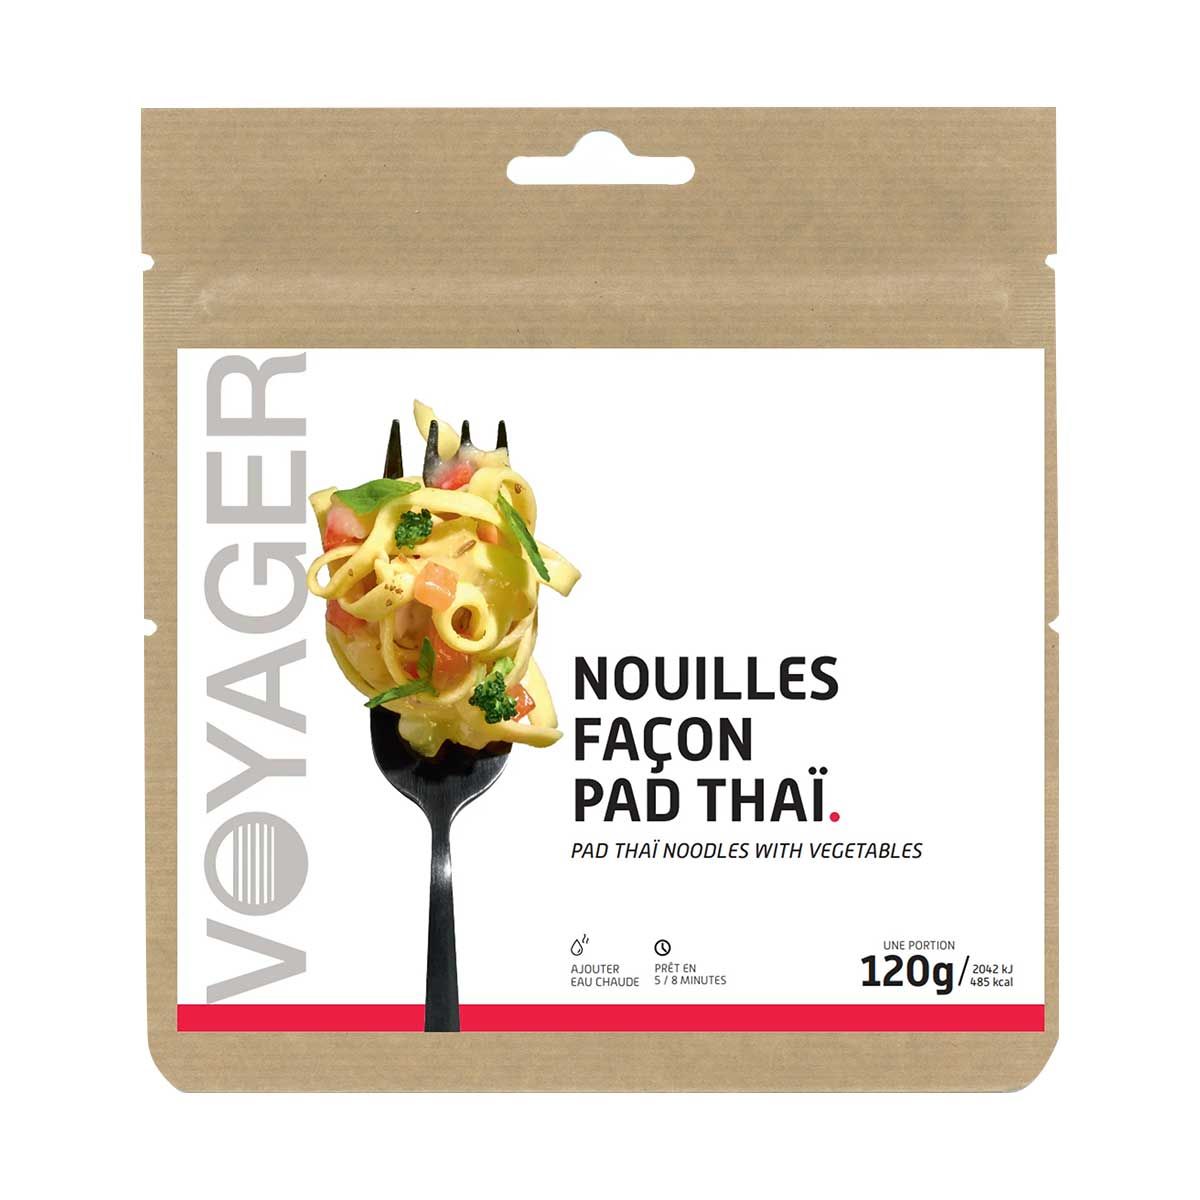 Vegetable noodles in pad thai style